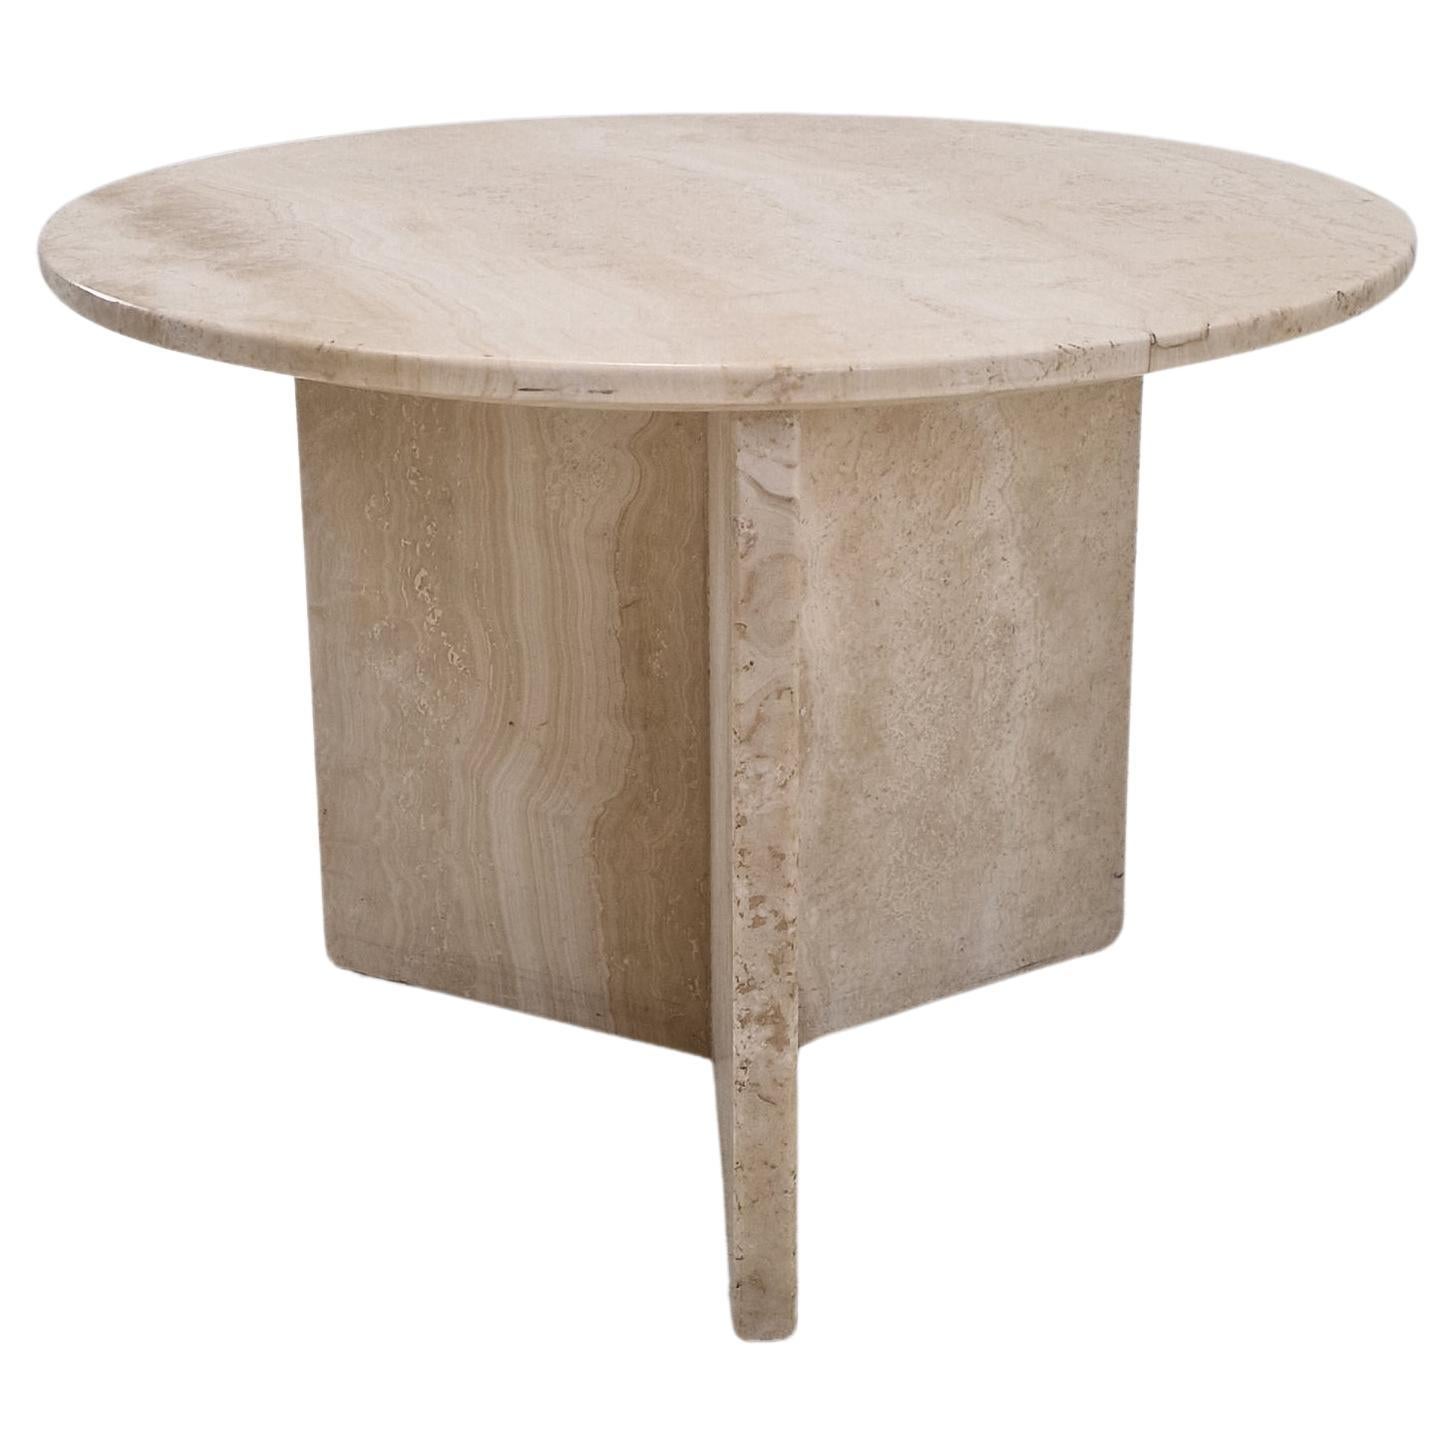 Italian Round Coffee or Side Table in Travertine, 1980s For Sale